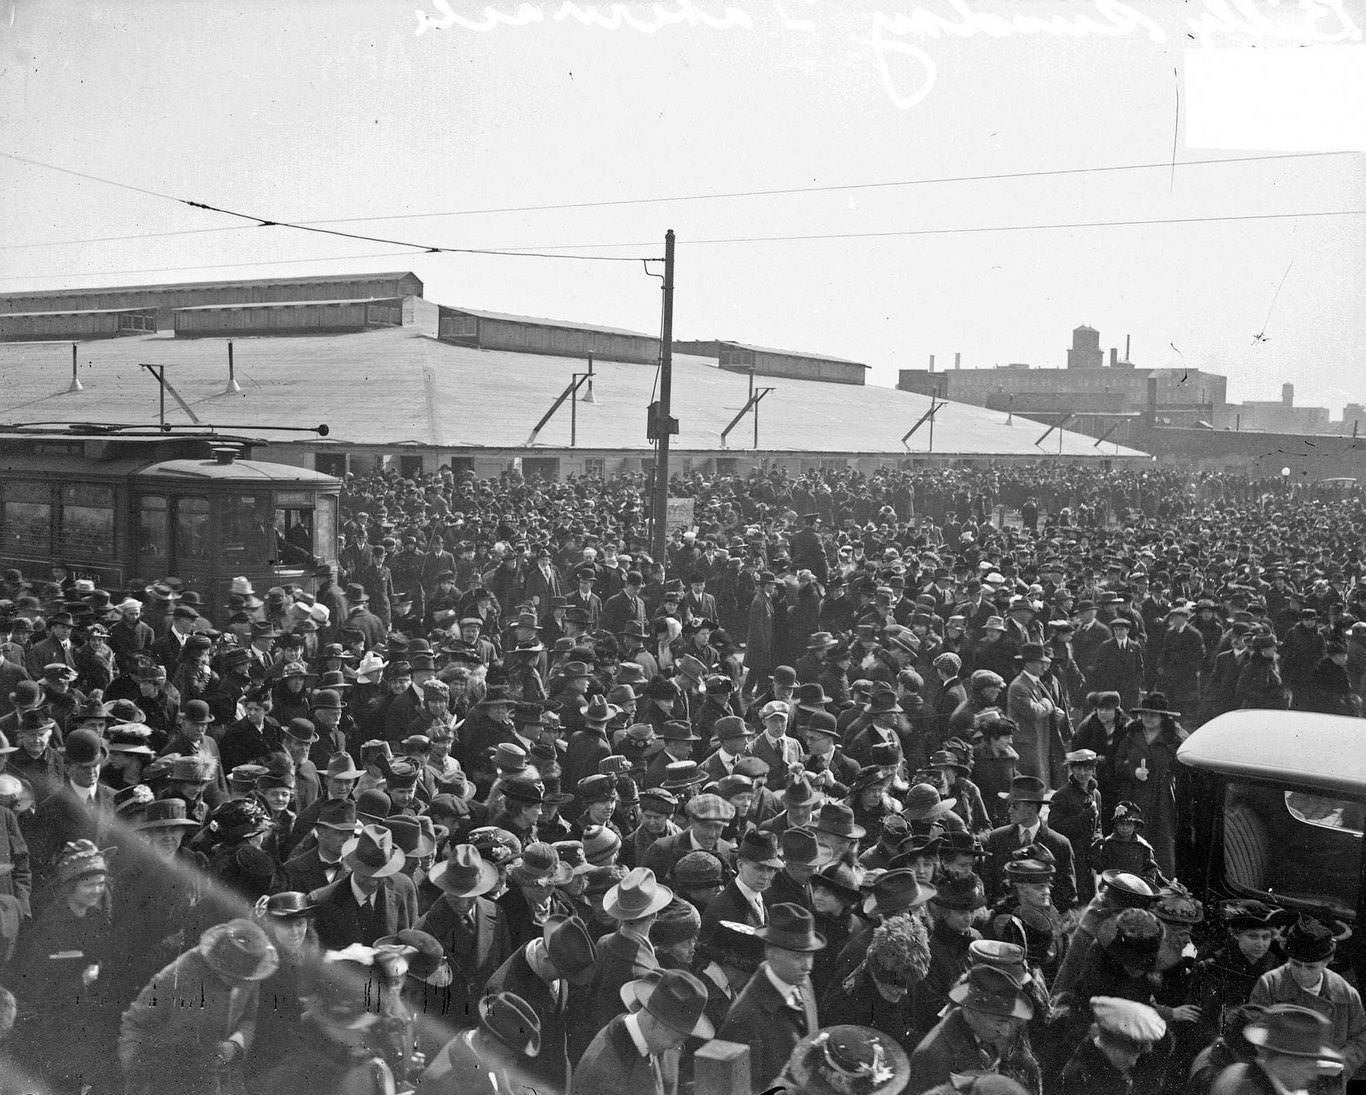 Crowd gathered outside evangelist Billy Sunday's tent, called a tabernacle, set up just north of Navy Pier, Chicago, Illinois, March 15, 1918.